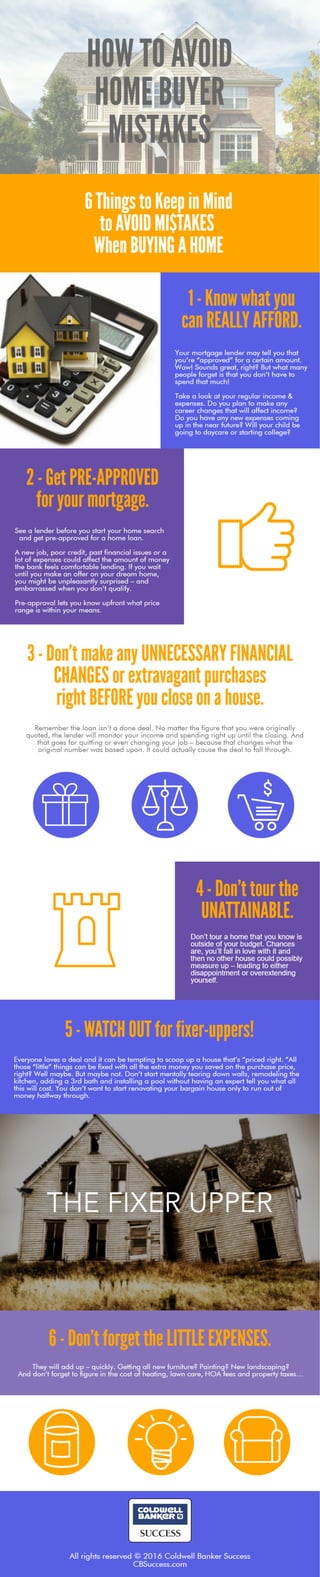 How to Avoid Home Buyer Mistakes Infographic